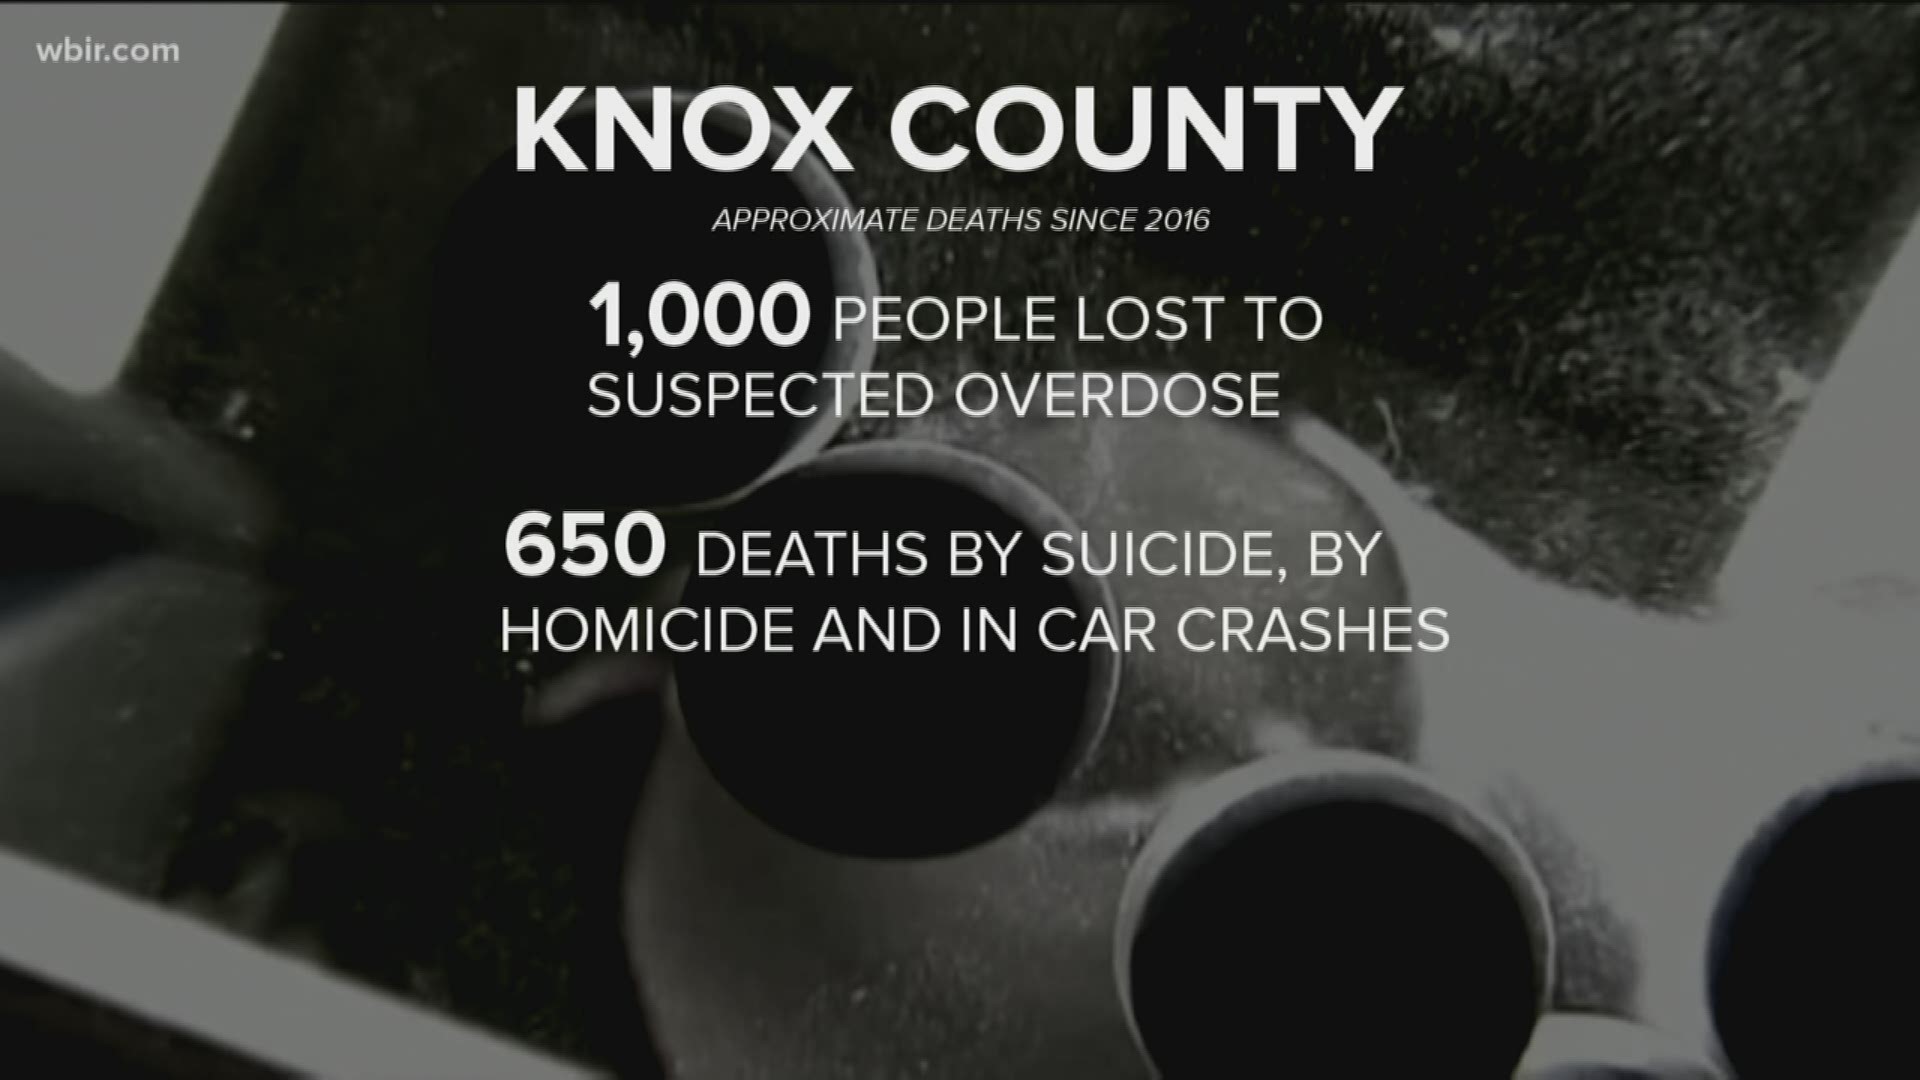 998 lives were lost to the opioid crisis since 2016 in Knoxville.